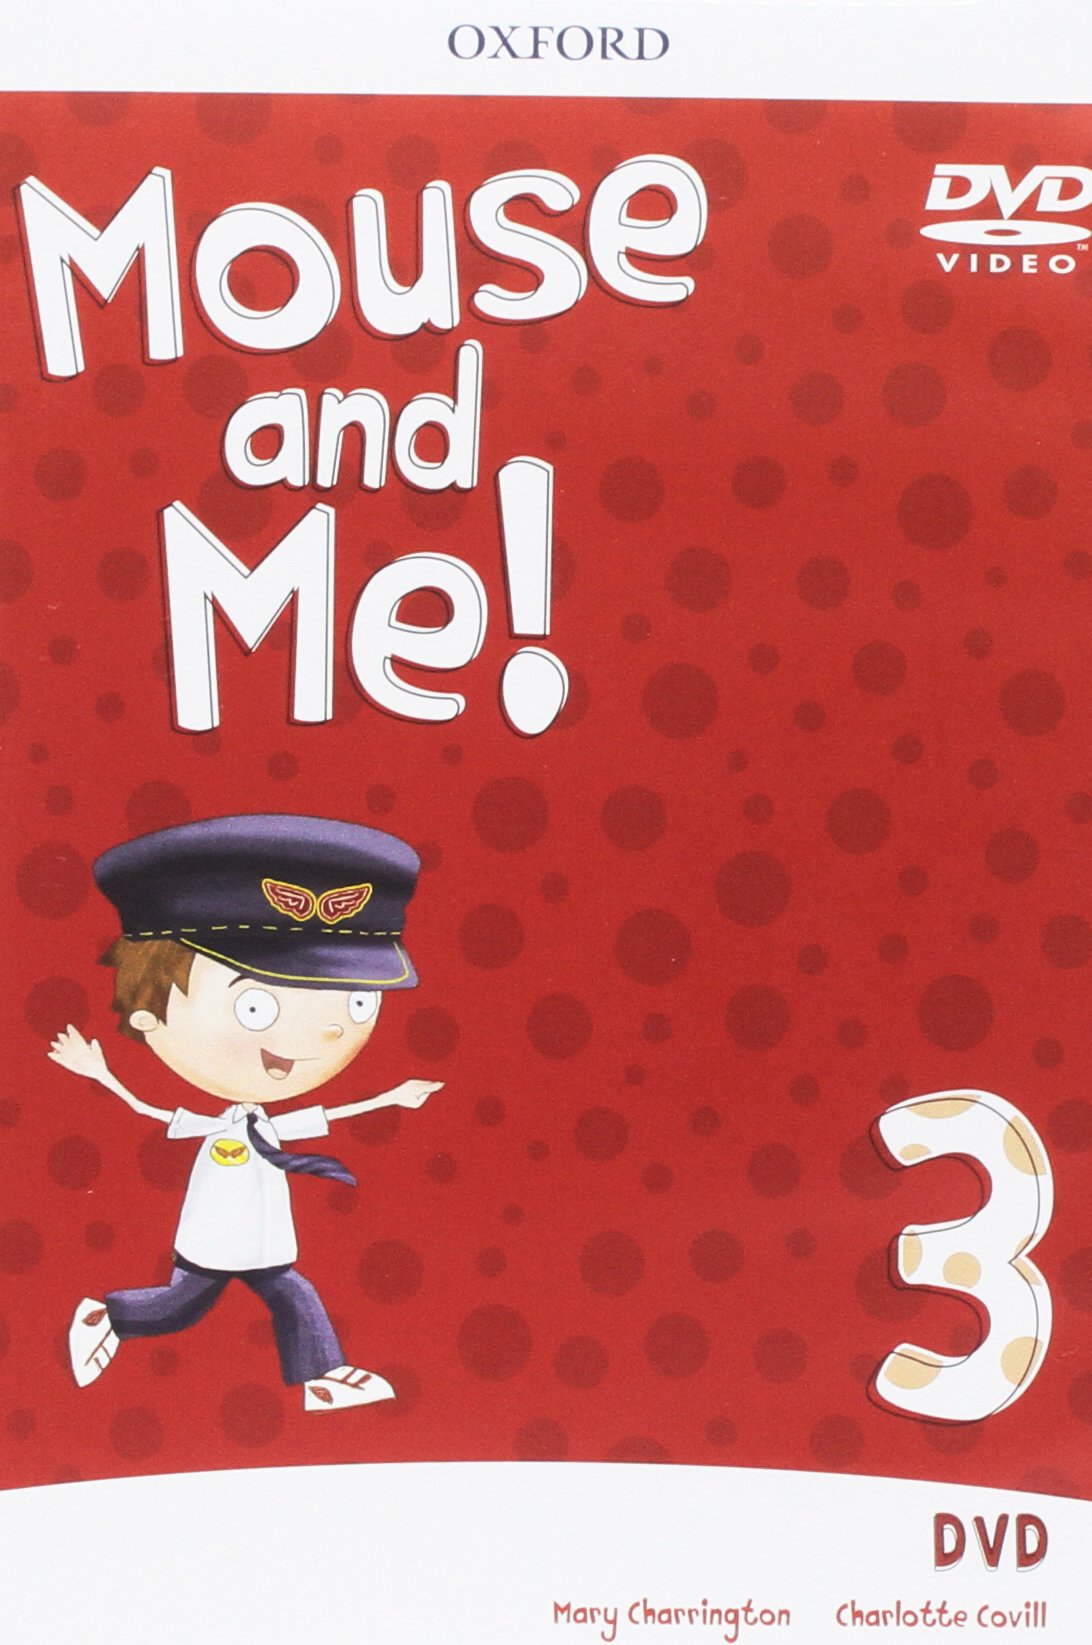 MOUSE AND ME! 3 DVD